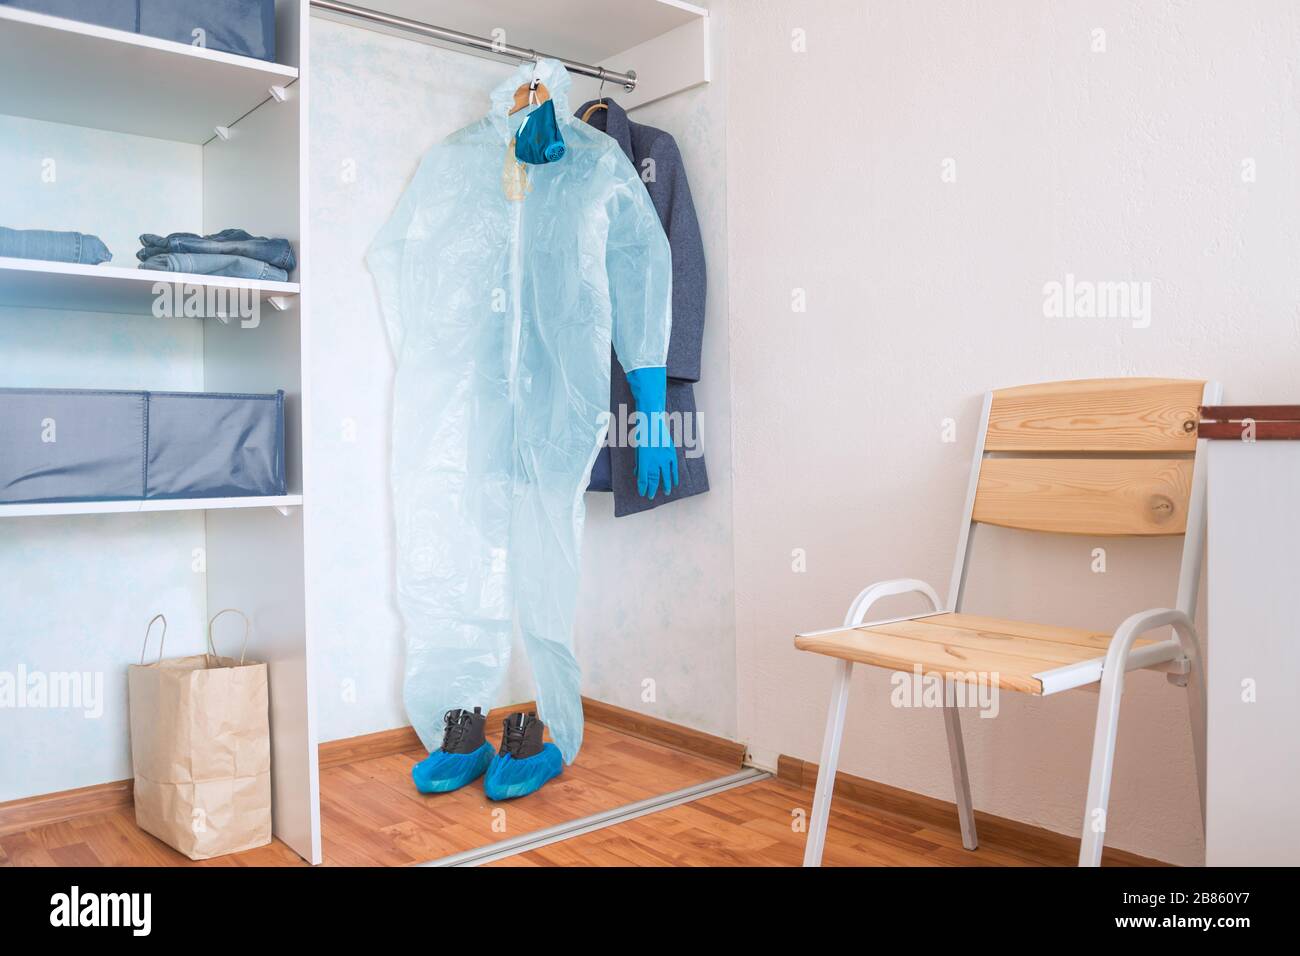 protective suit with gloves, mask and glasses hanging in wardrobe with otherclothes at over reacting and panicing person's home Stock Photo